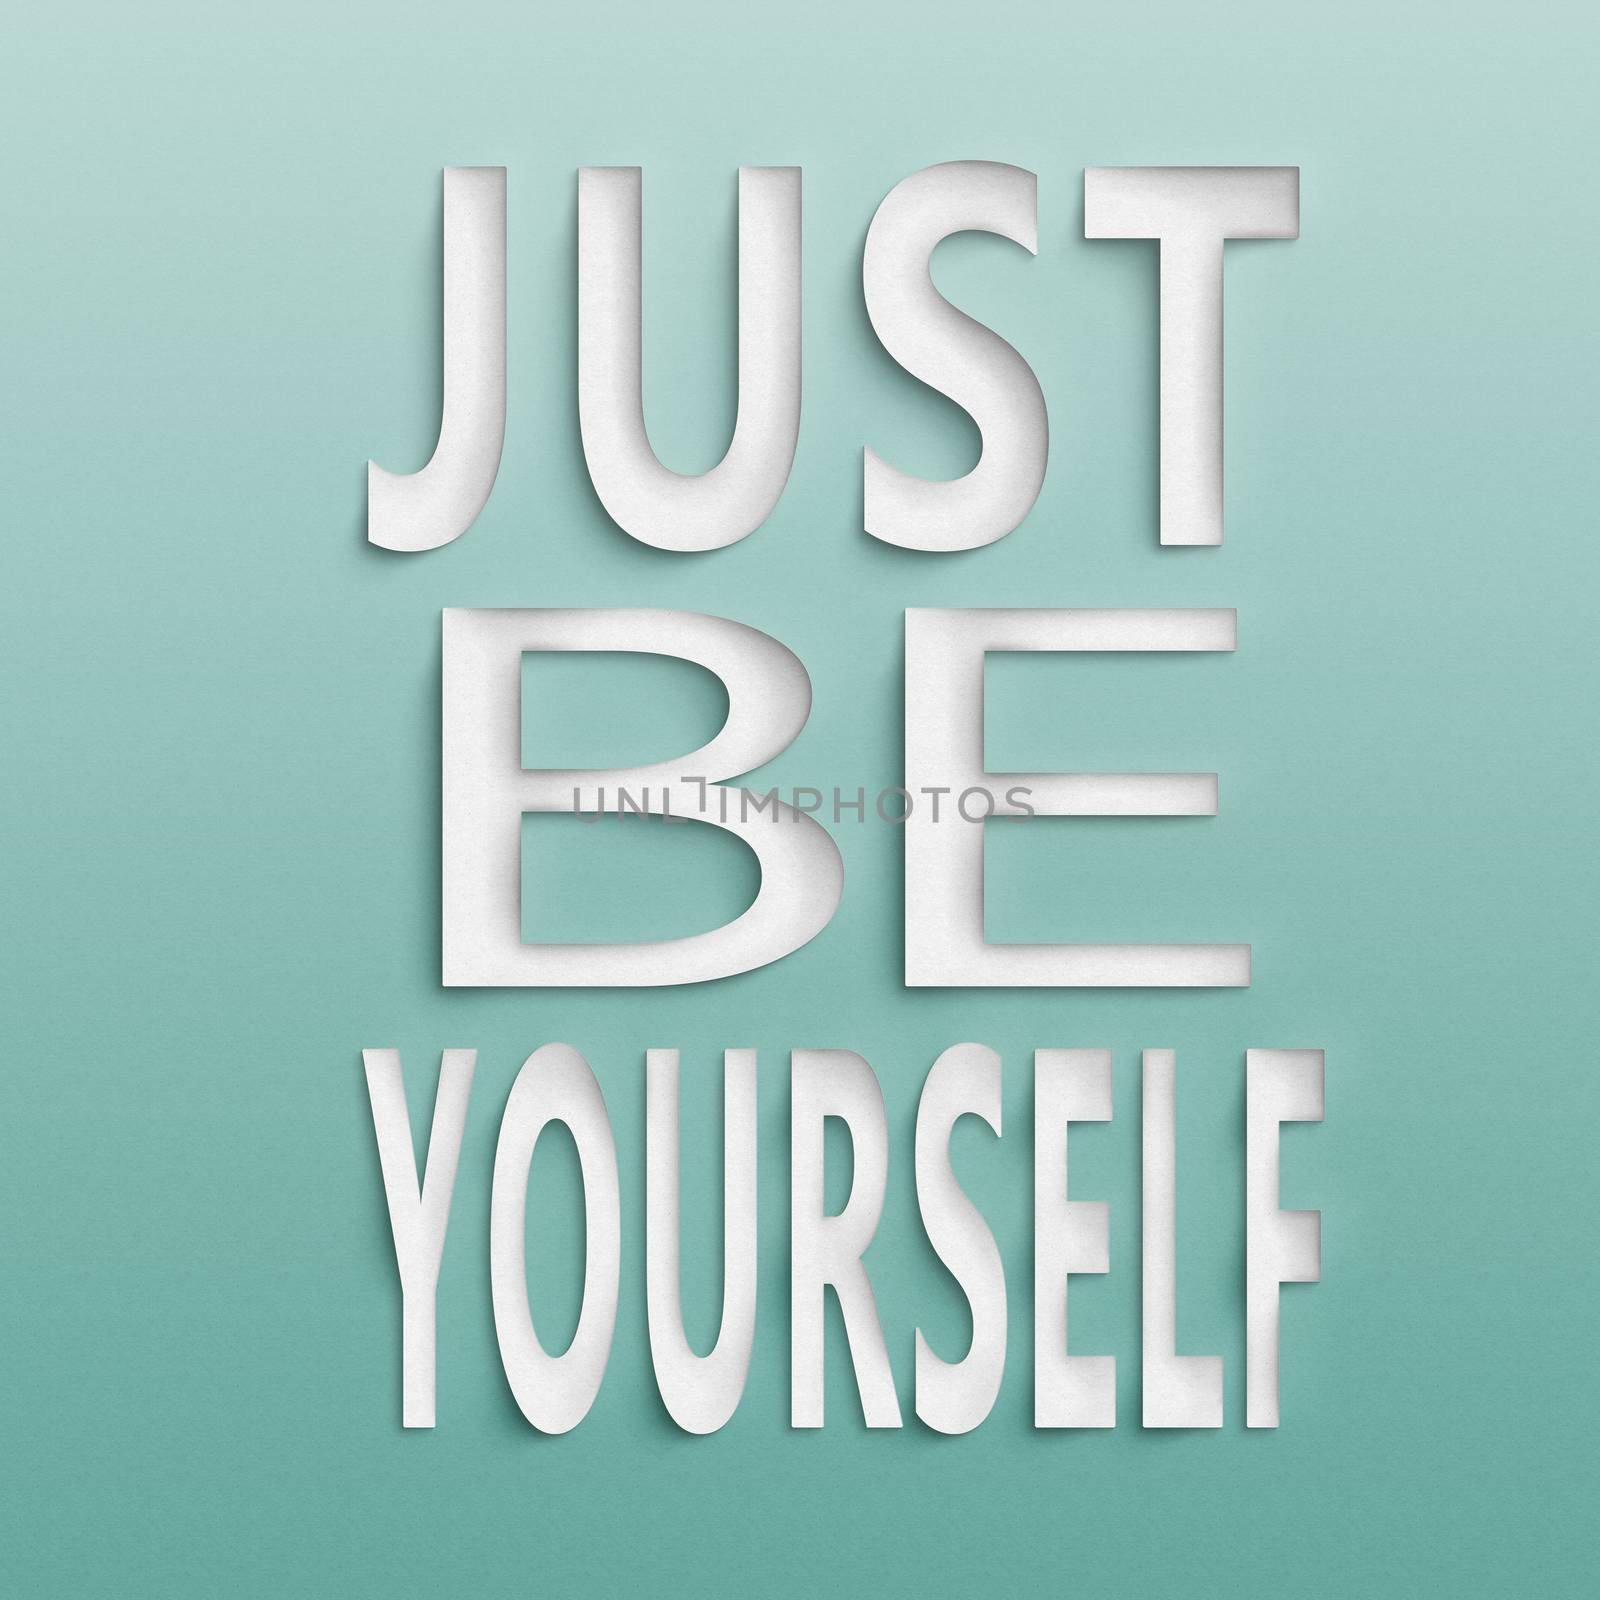 Just be yourself. Concept text on paper.